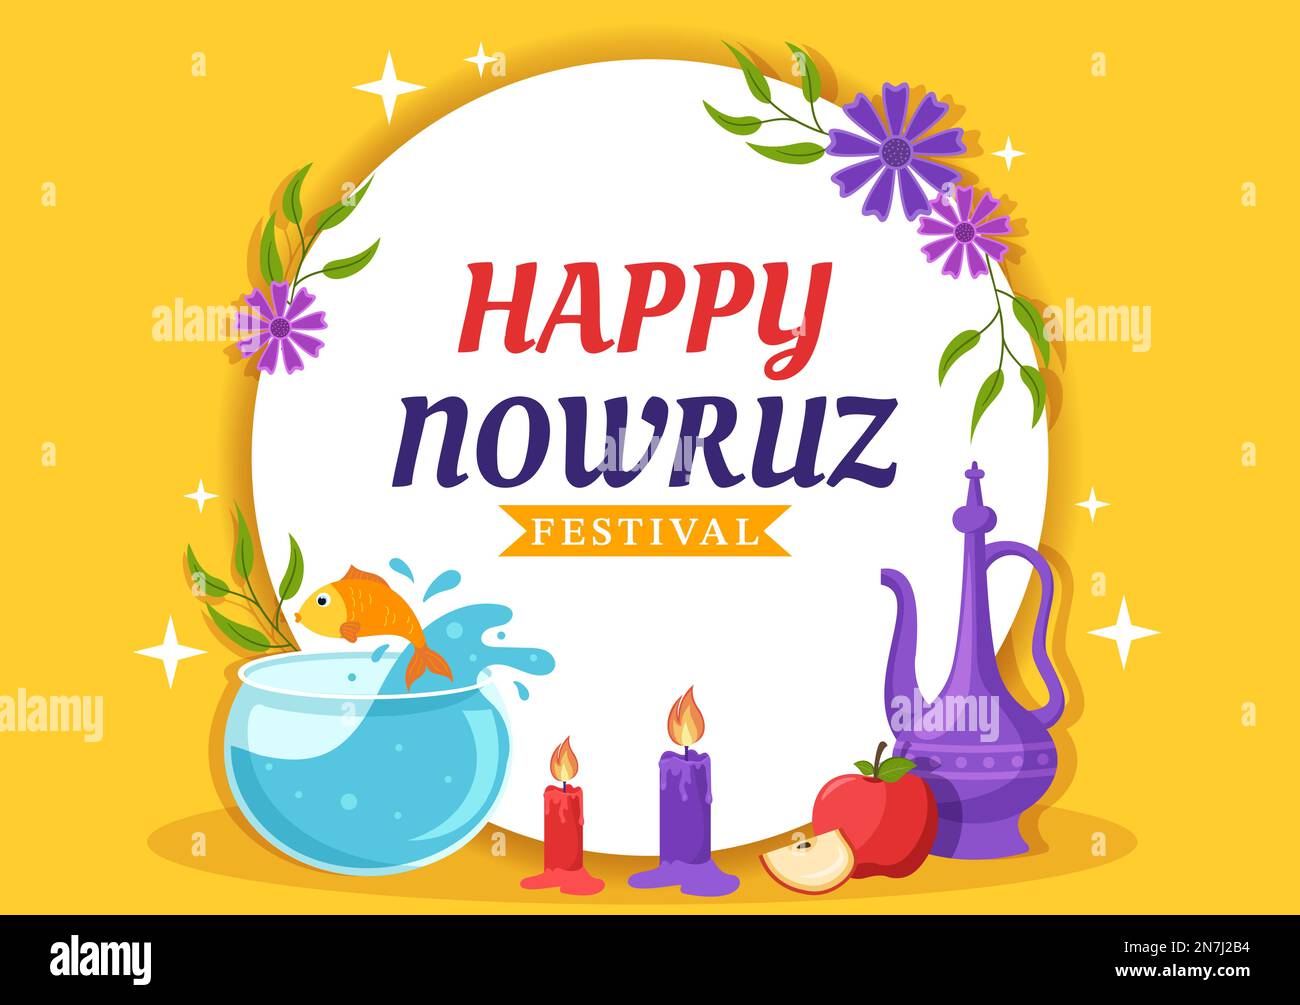 Happy Nowruz Day or Iranian New Year Illustration with Grass Semeni and Fish for Web Banner or Landing Page in Flat Cartoon Hand Drawn Templates Stock Vector